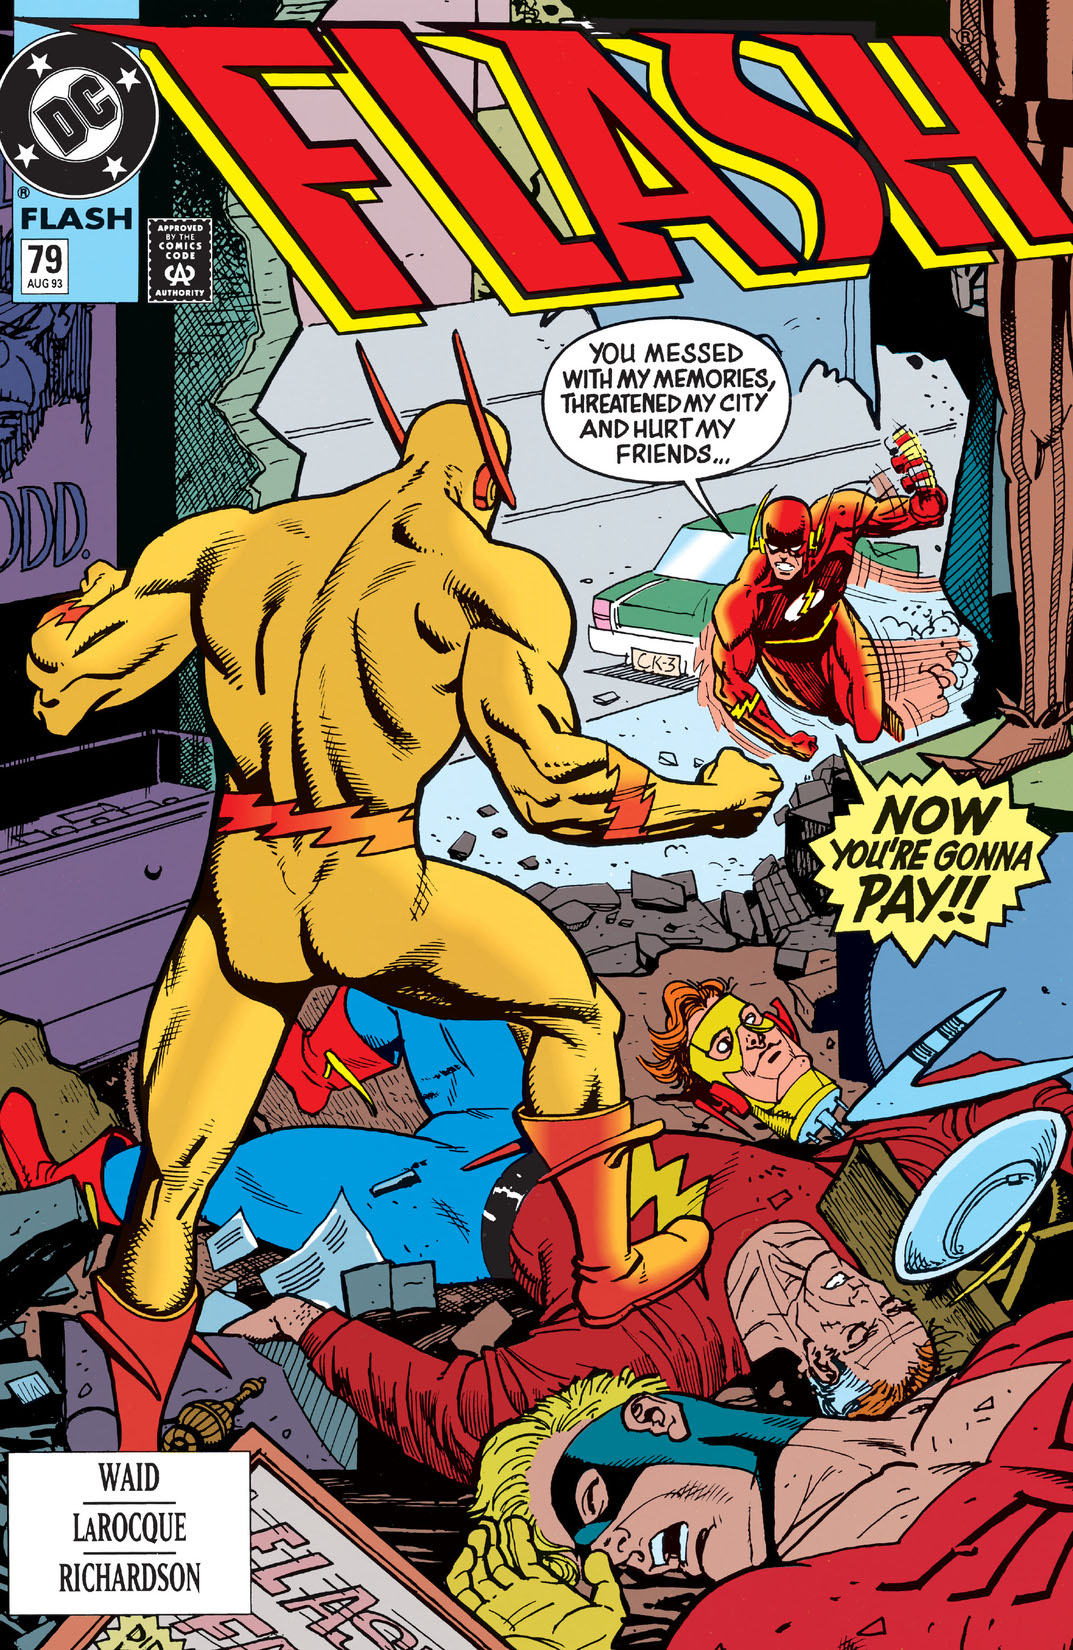 The Flash (1987-) #79 preview images